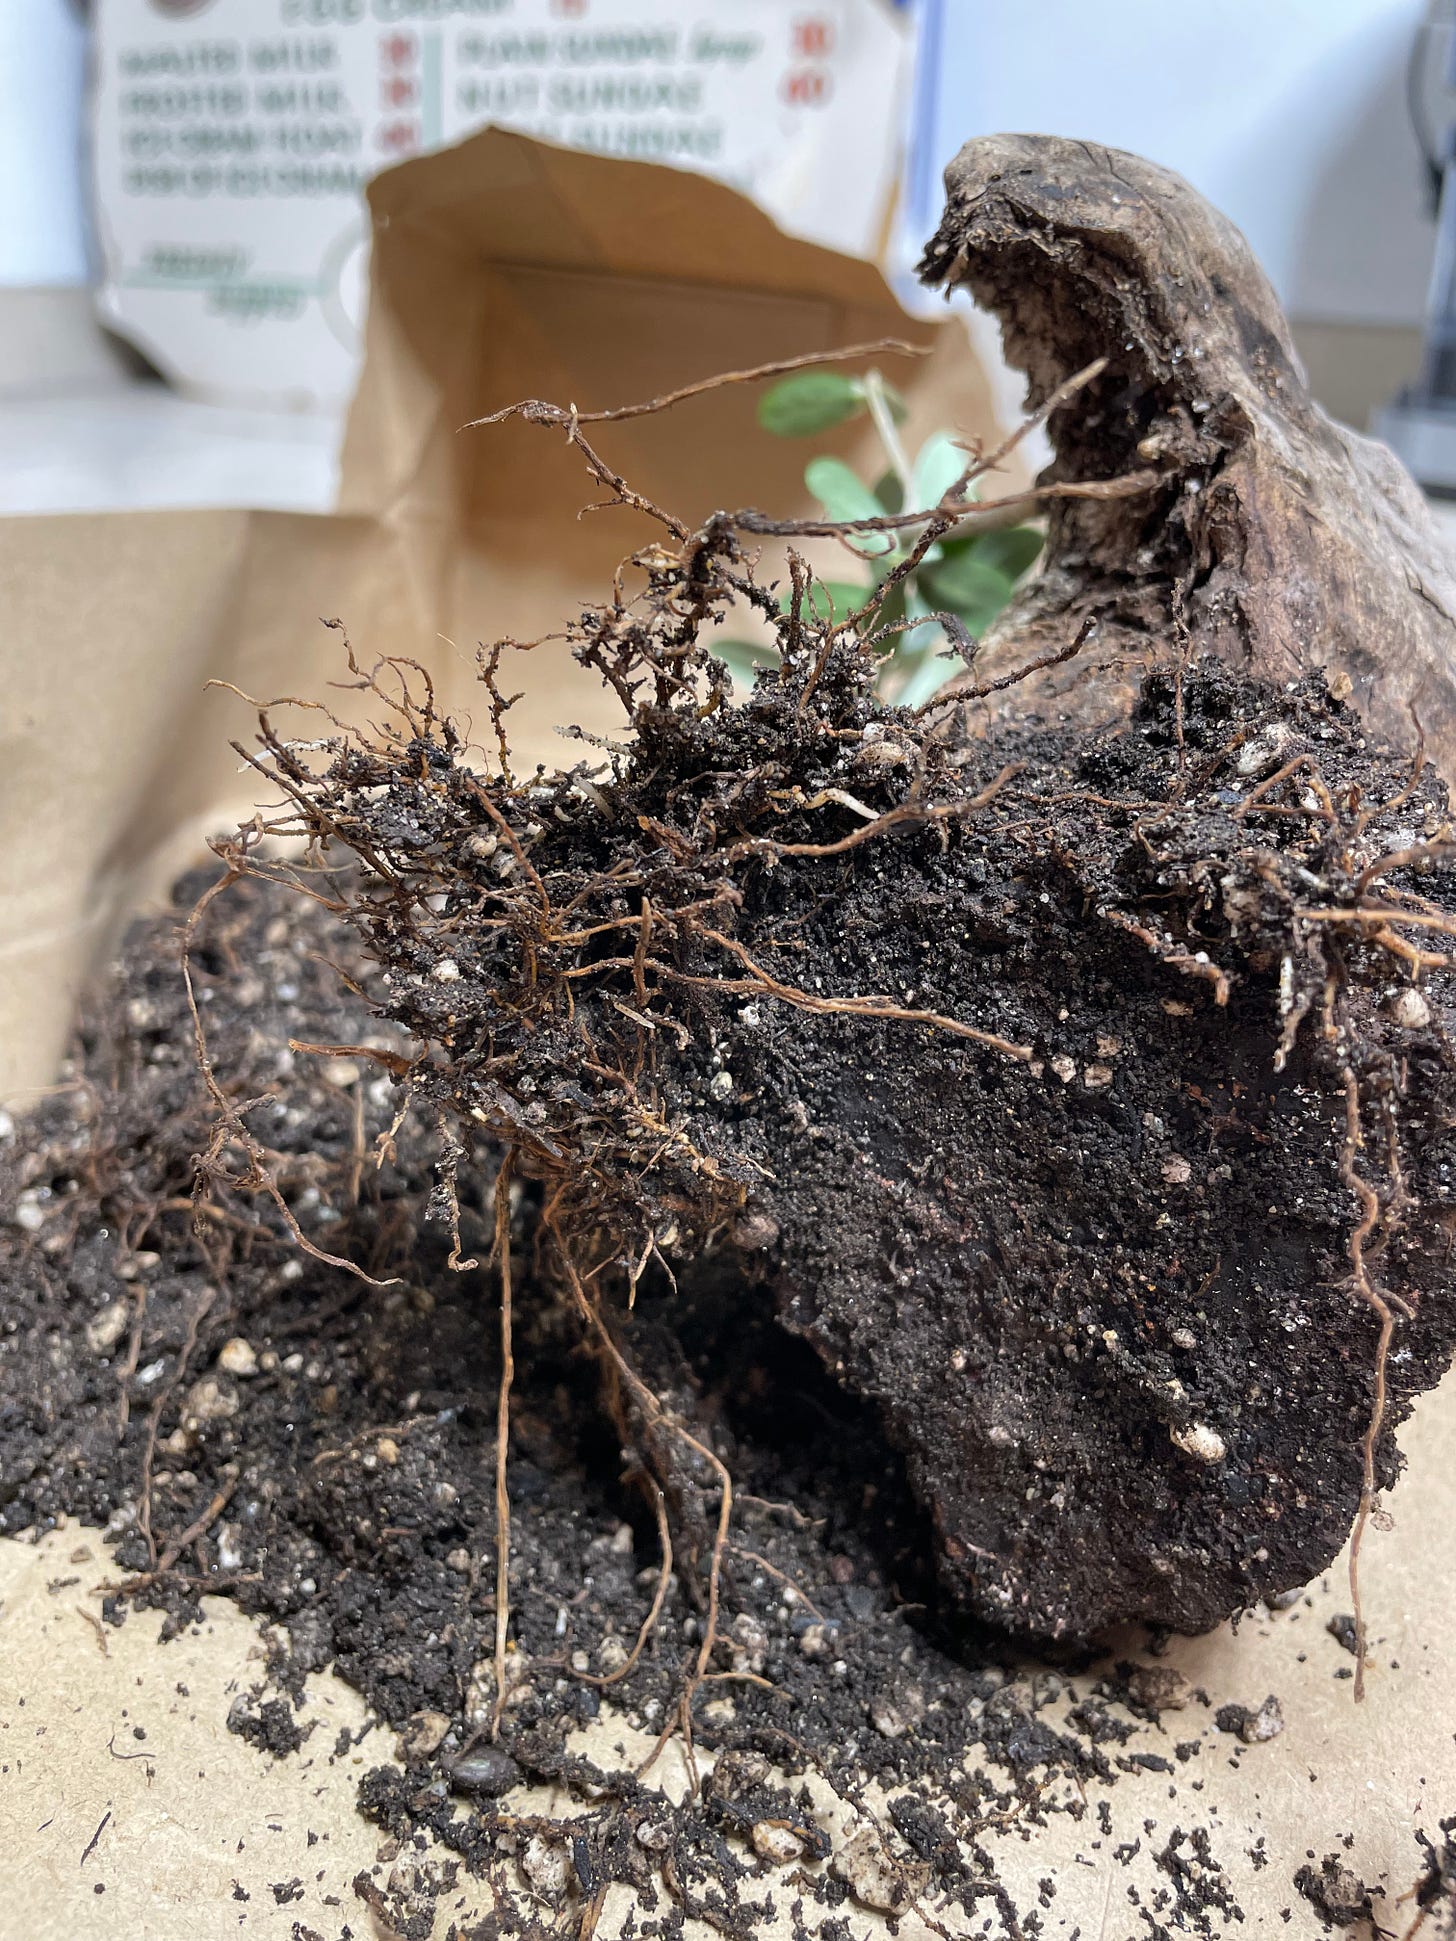 ID: Photo of my olive stump pre bonsai, lying on its side out of its pot, revealing just a few wimpy, smushy roots supporting the whole tree.